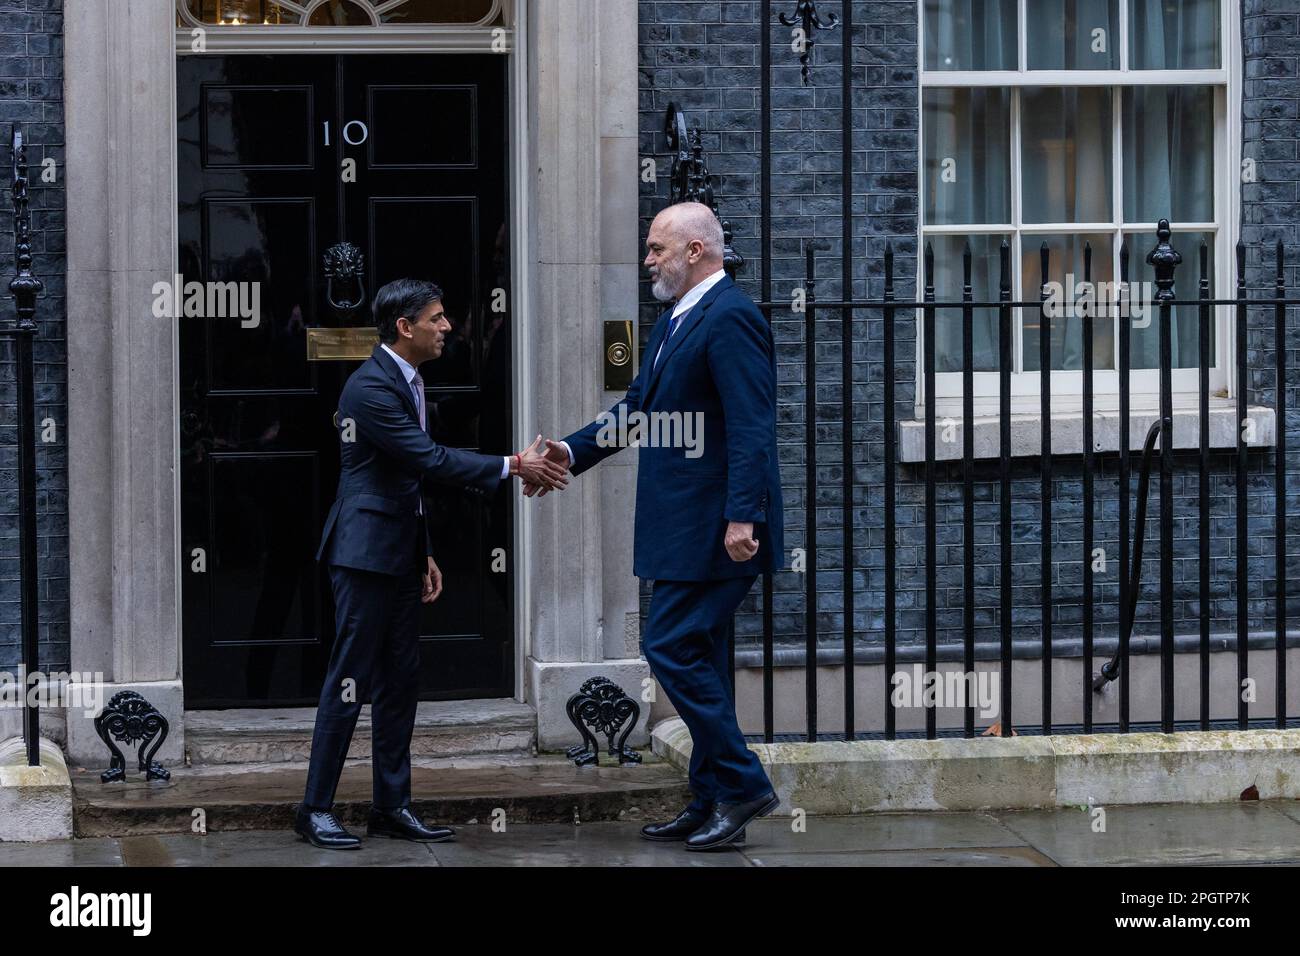 London, UK. 23rd March, 2023. Rishi Sunak, Prime Minister of the United Kingdom, greets Edi Rama, Prime Minister of Albania, before a meeting at 10 Downing Street. Edi Rama, who has been Prime Minister of Albania for almost a decade, is the first Albanian leader to visit 10 Downing Street. Topics to be discussed at the meeting are expected to include migration, organised crime and bilateral relations between the UK and Albania. Credit: Mark Kerrison/Alamy Live News Stock Photo